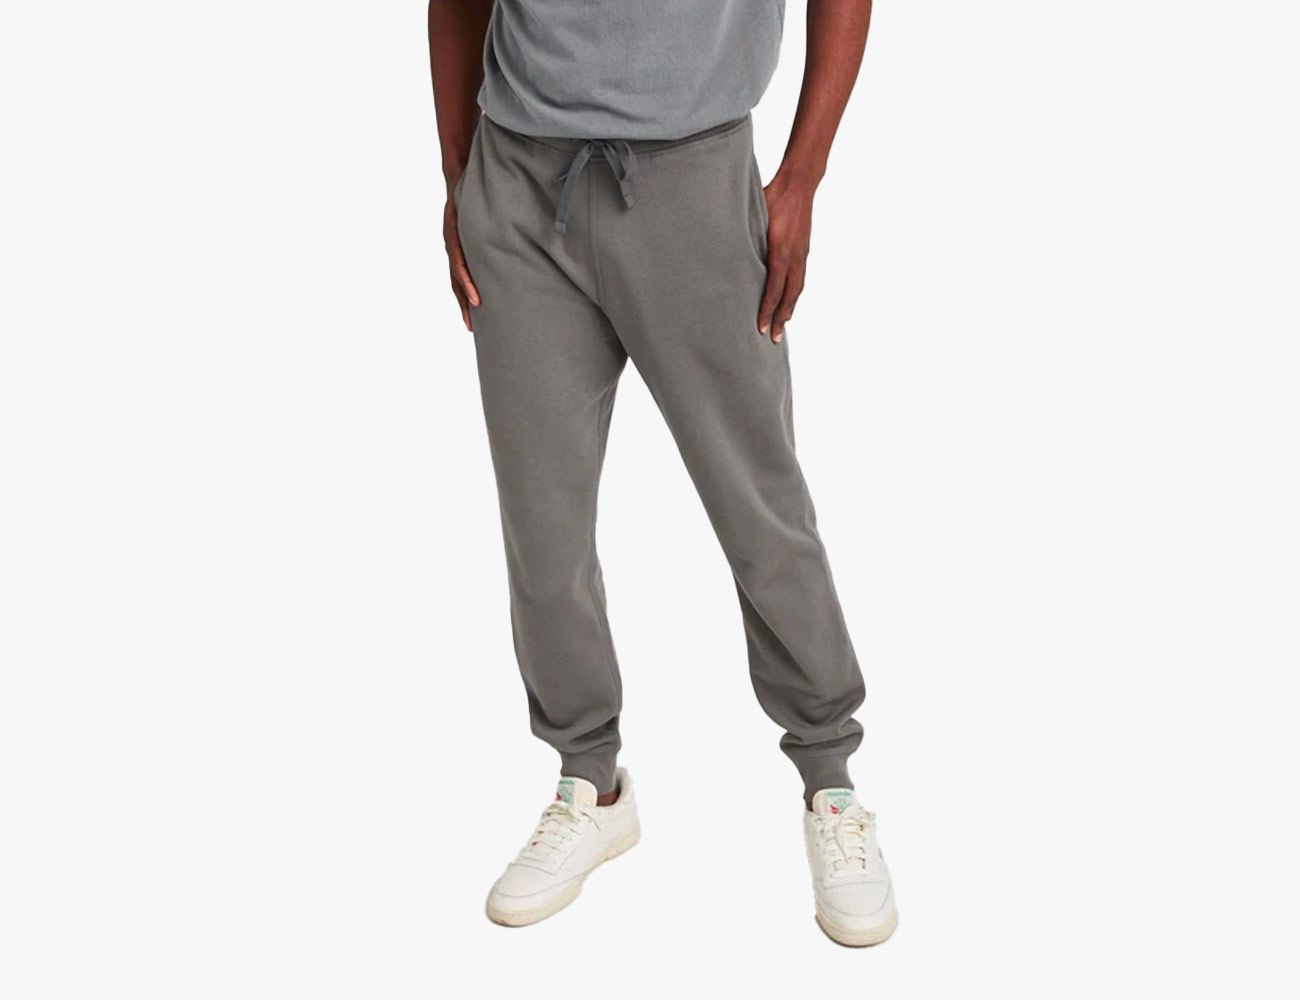 The Best Sweatpants to Wear Everywhere